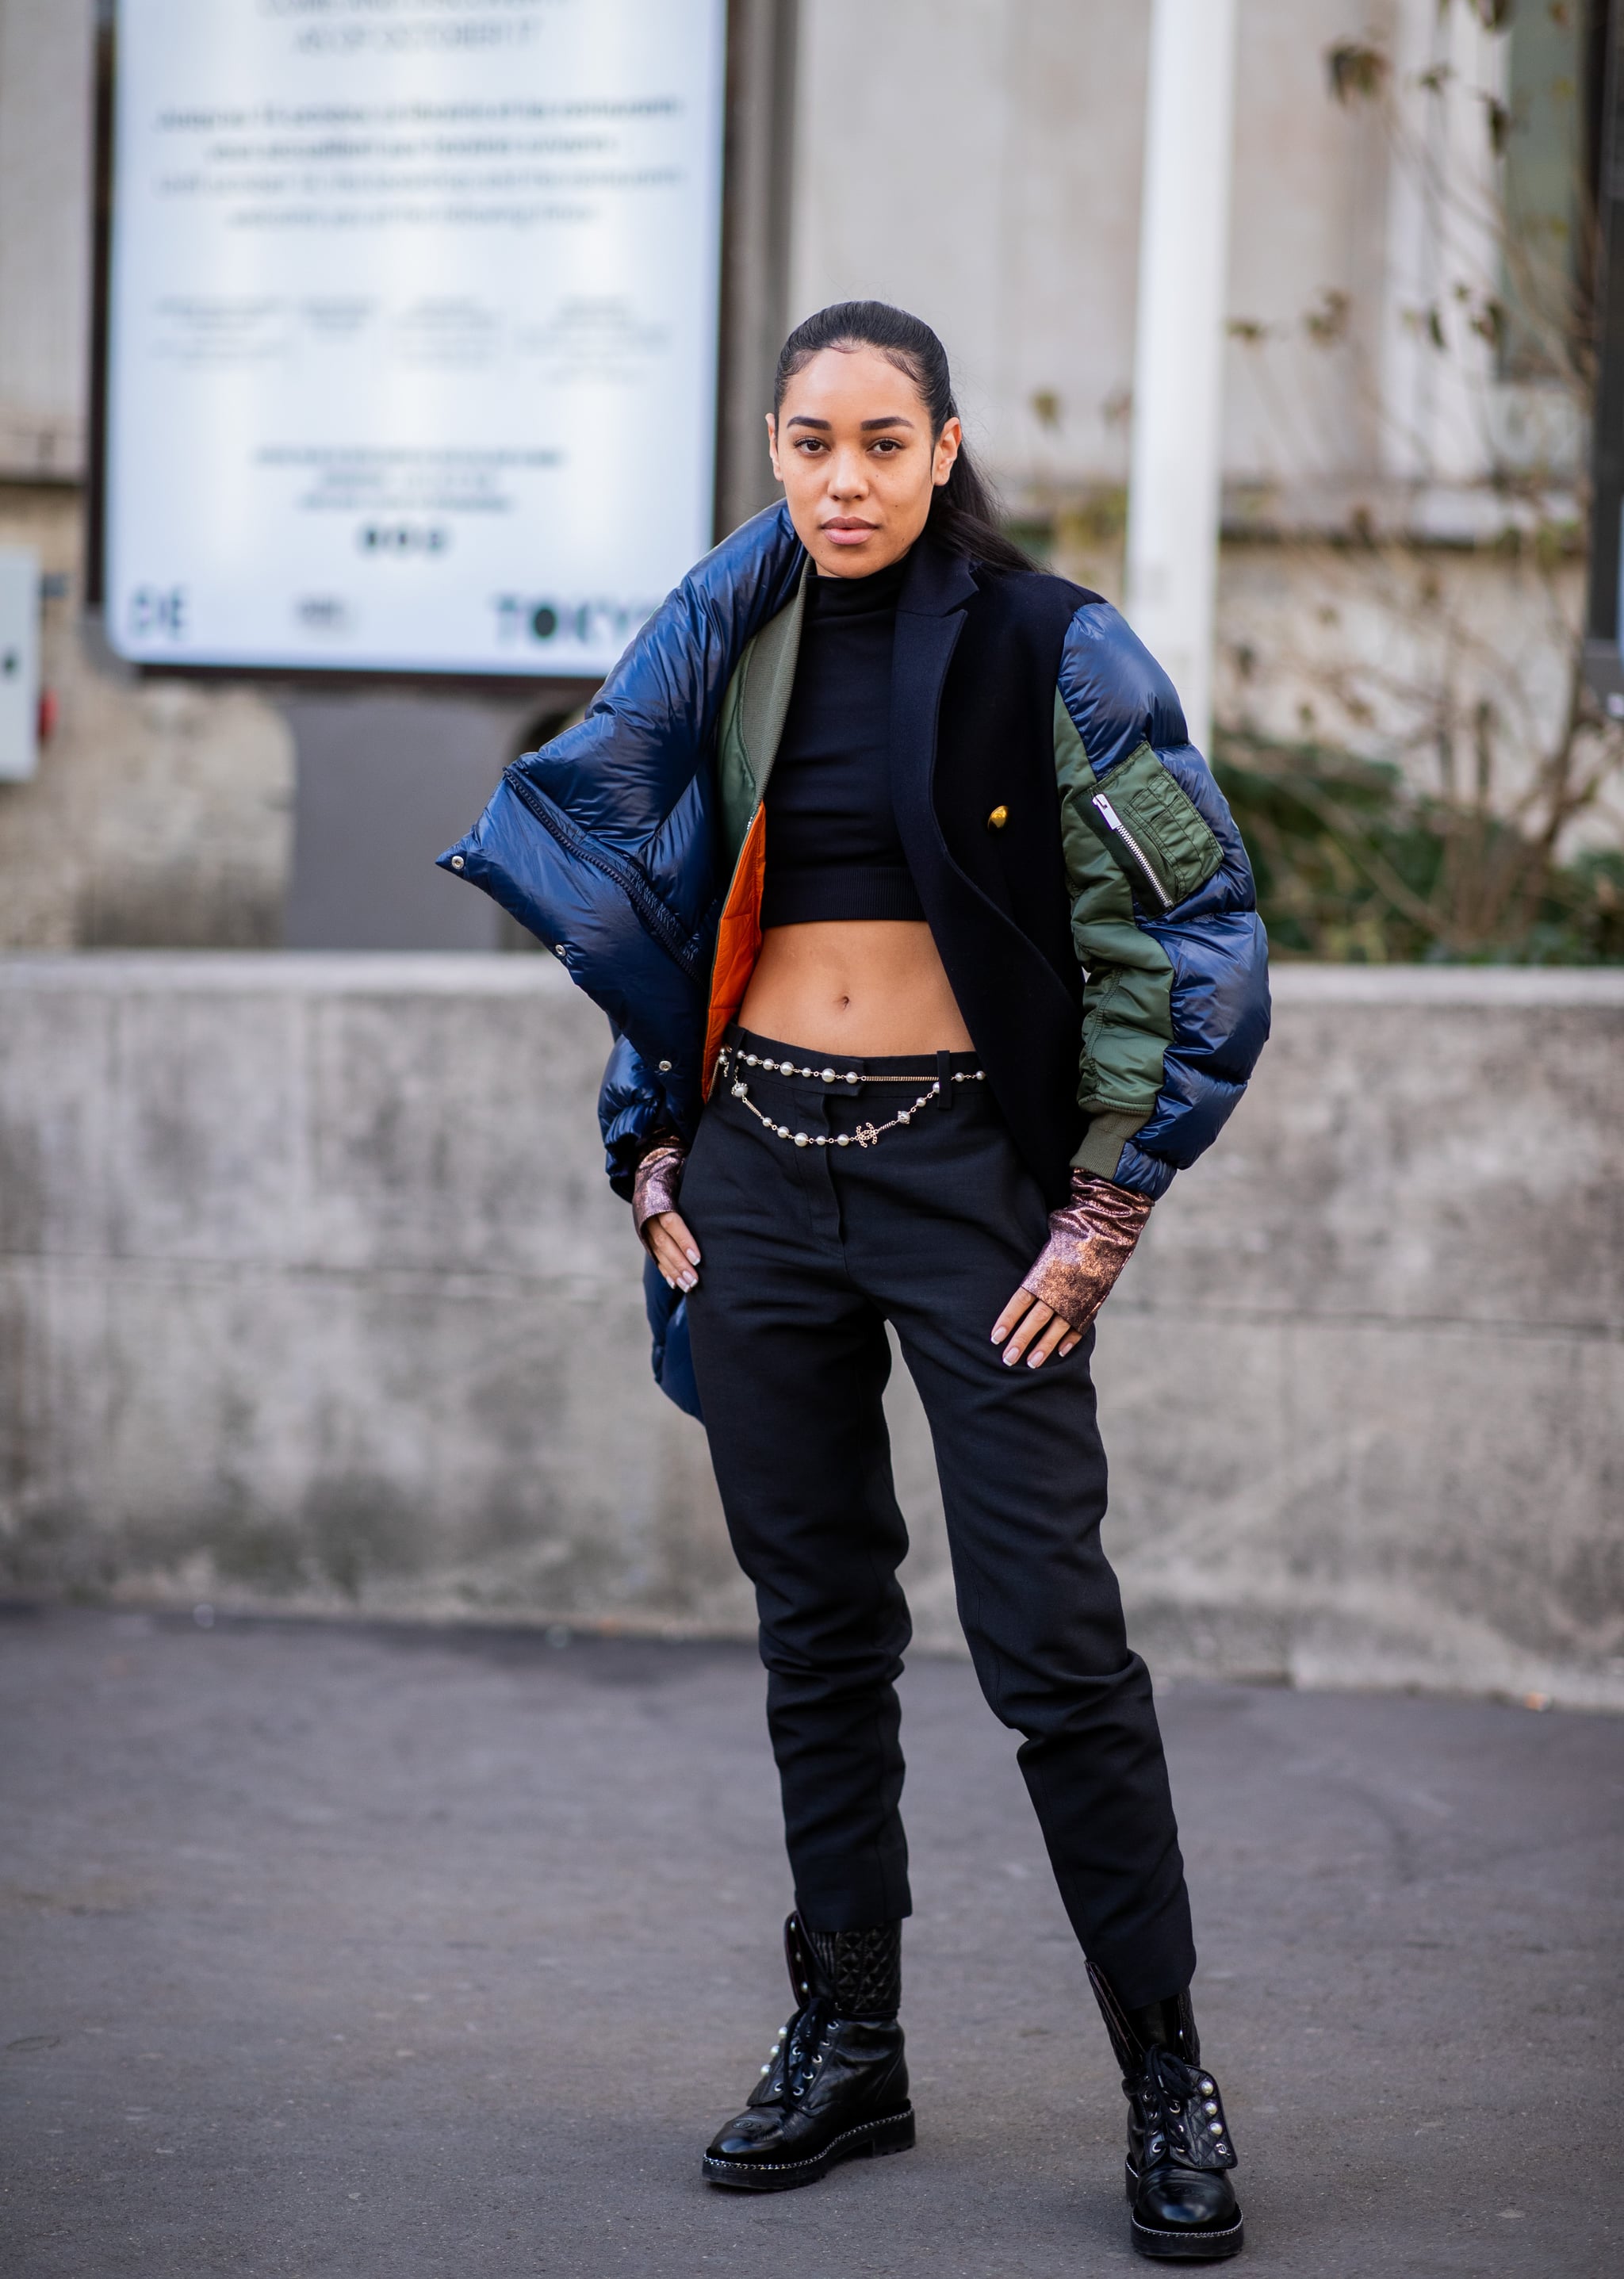 Style a Turtleneck Crop Top With Black Pants and a Puffer | 19 Winter Outfit  Ideas That'll Get You Through 2019 and Beyond in Absolute Style | POPSUGAR  Fashion Photo 9